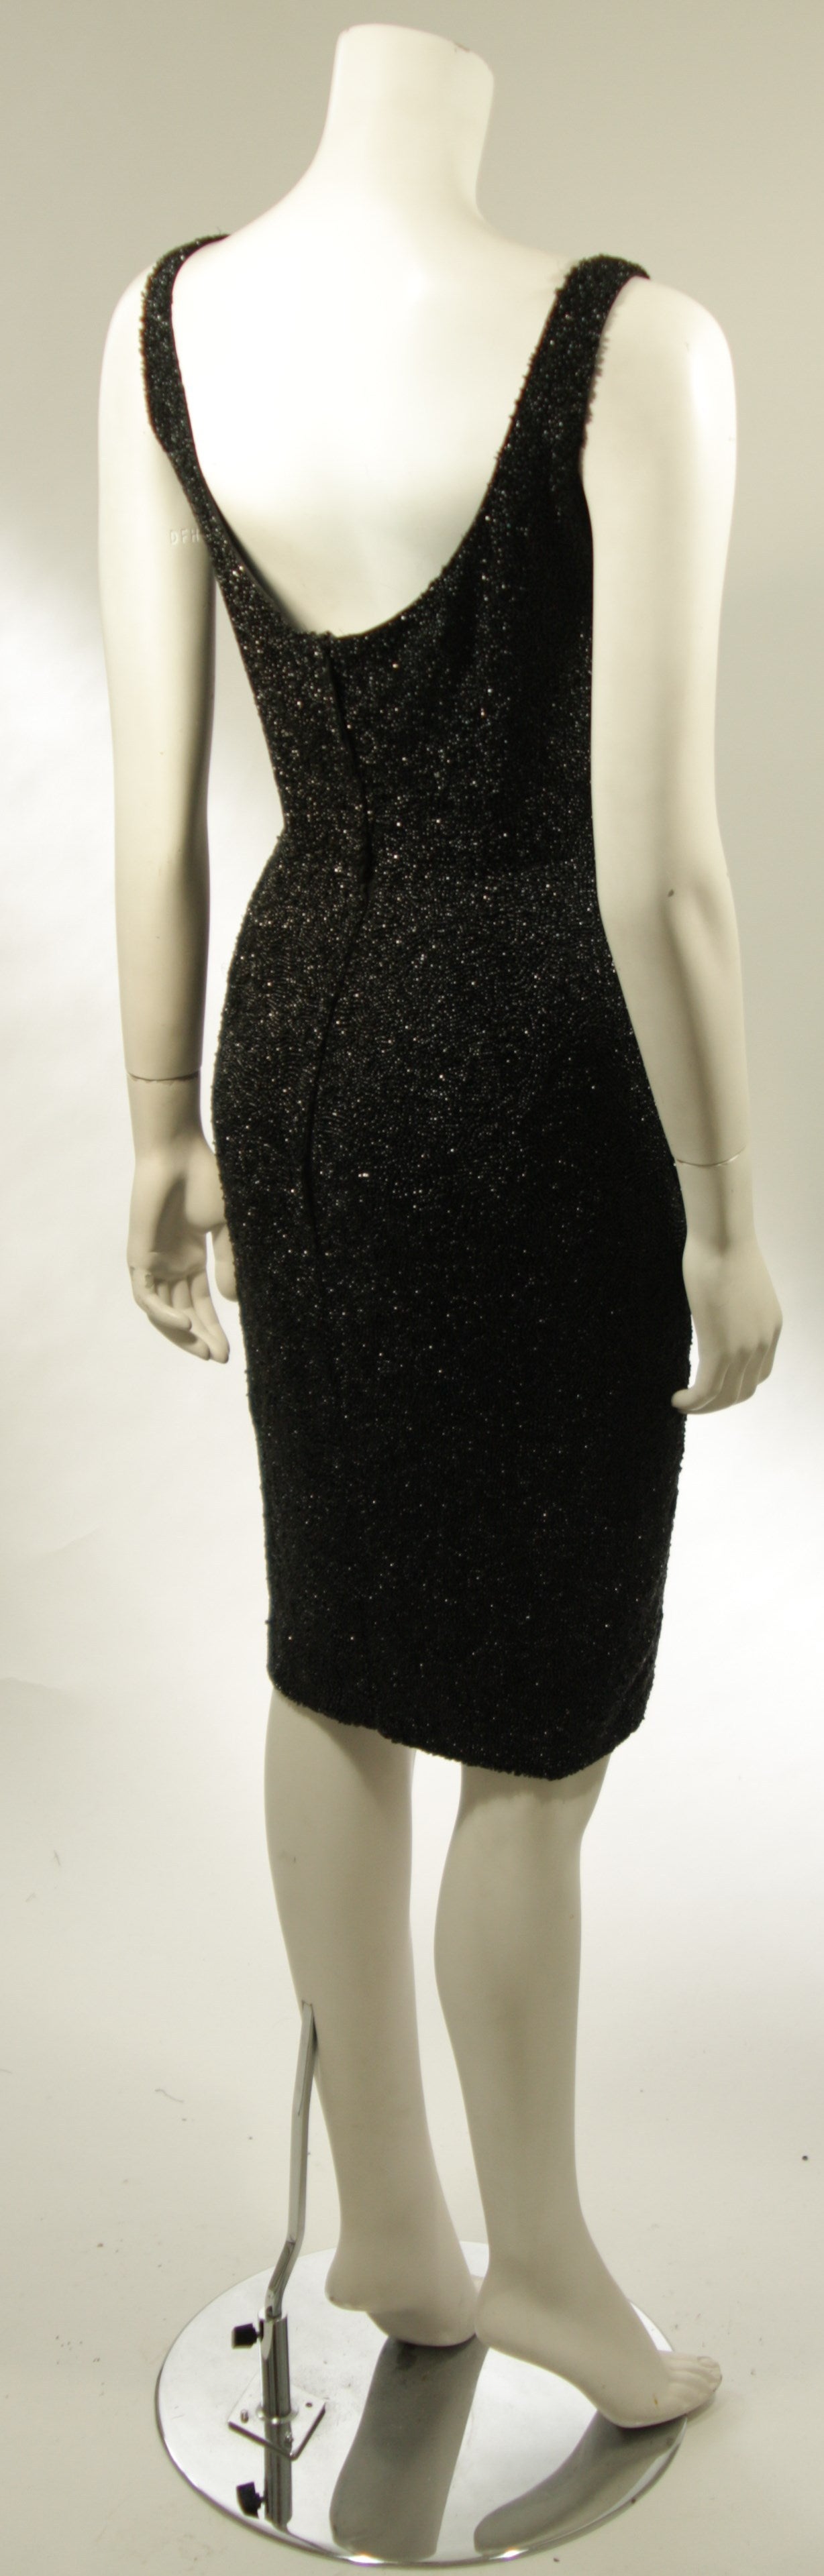 1960's Rare Black Caviar Beaded Cocktail Dress Size Large For Sale 3